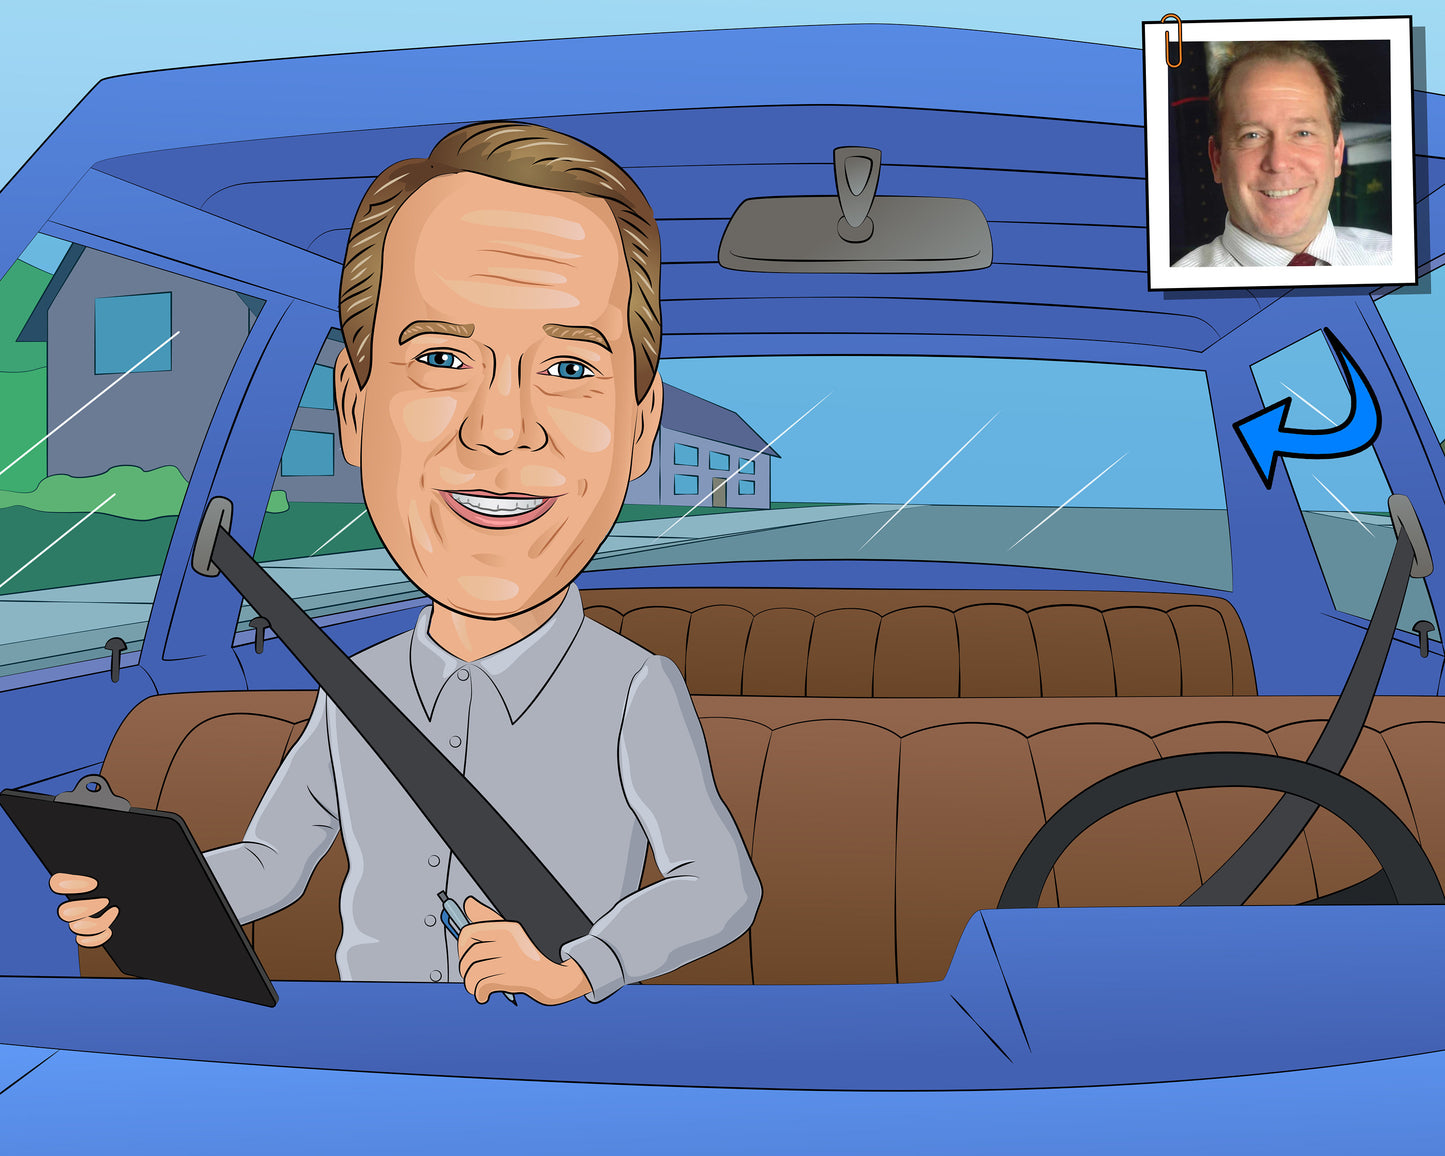 Driving Instructor Gift - Custom Caricature Portrait From Your Photo/driving school